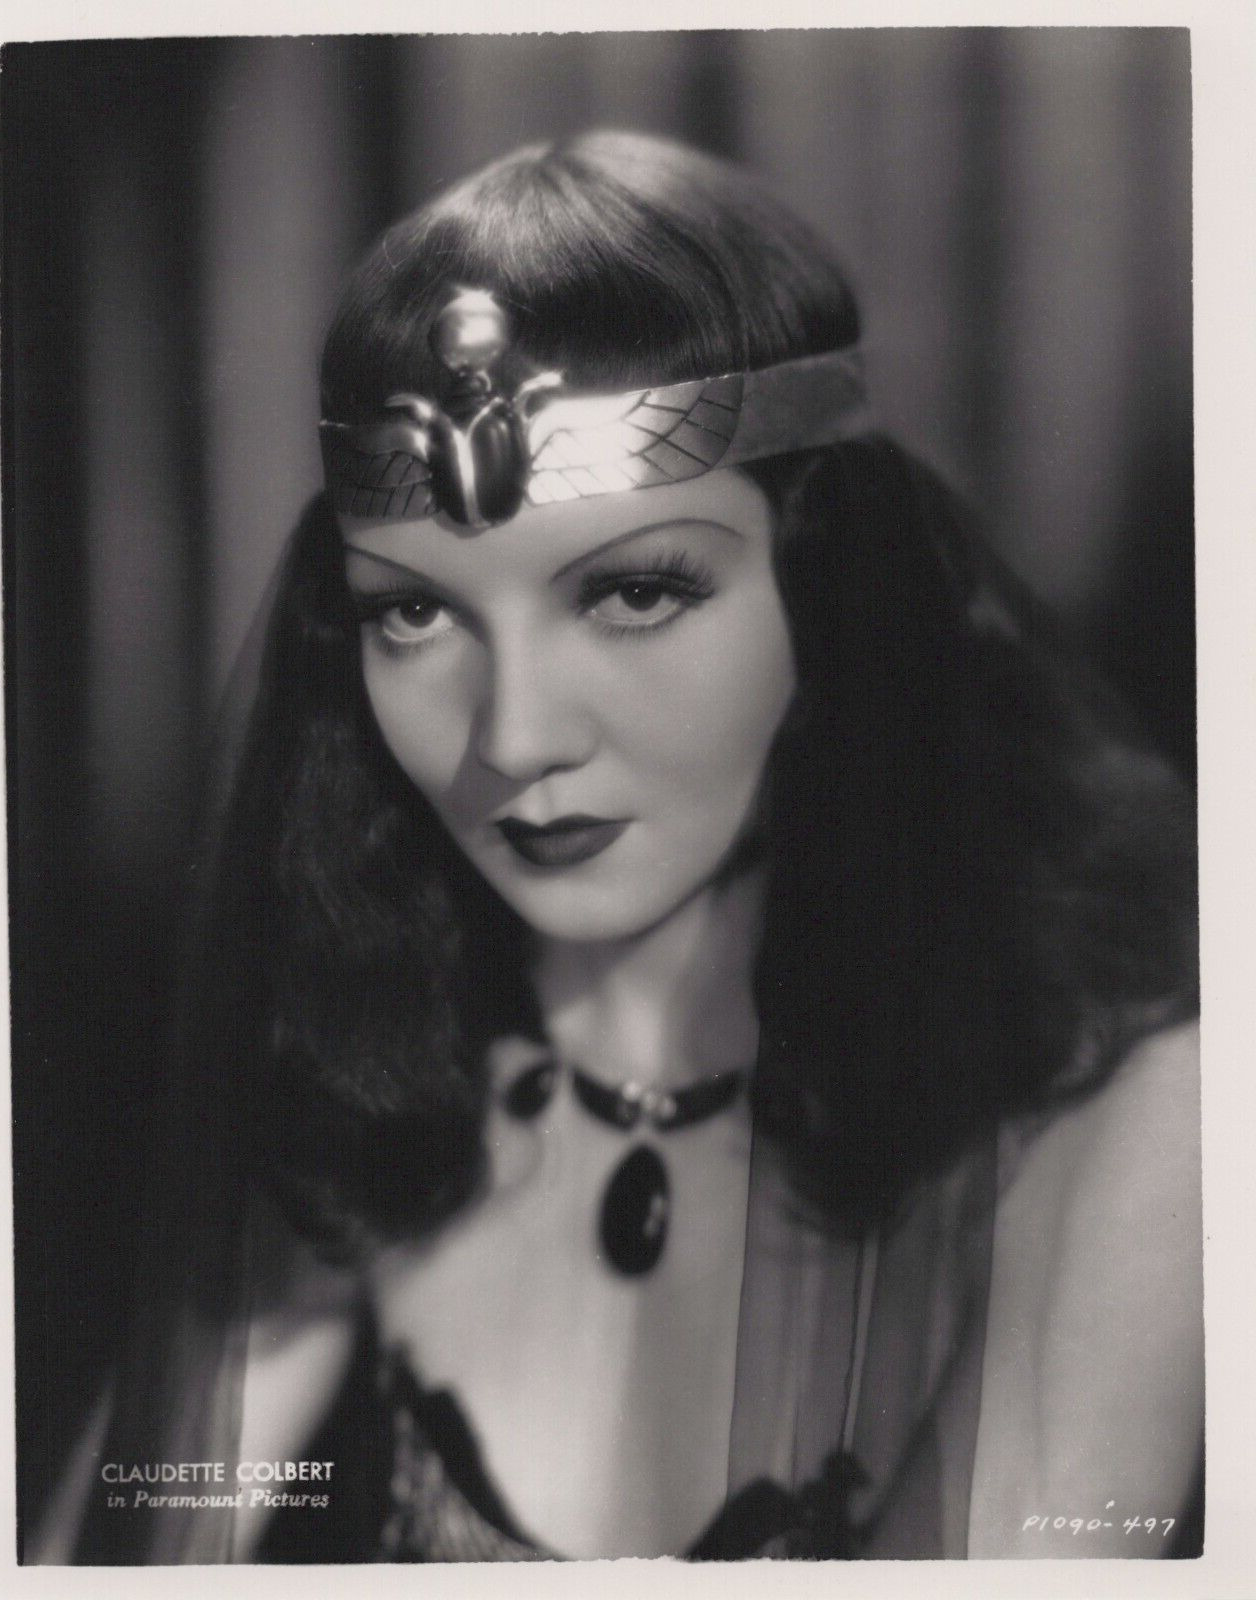 HOLLYWOOD BEAUTY CLAUDETTE COLBERT in CLEOPATRA PORTRAIT 1970s Photo C41